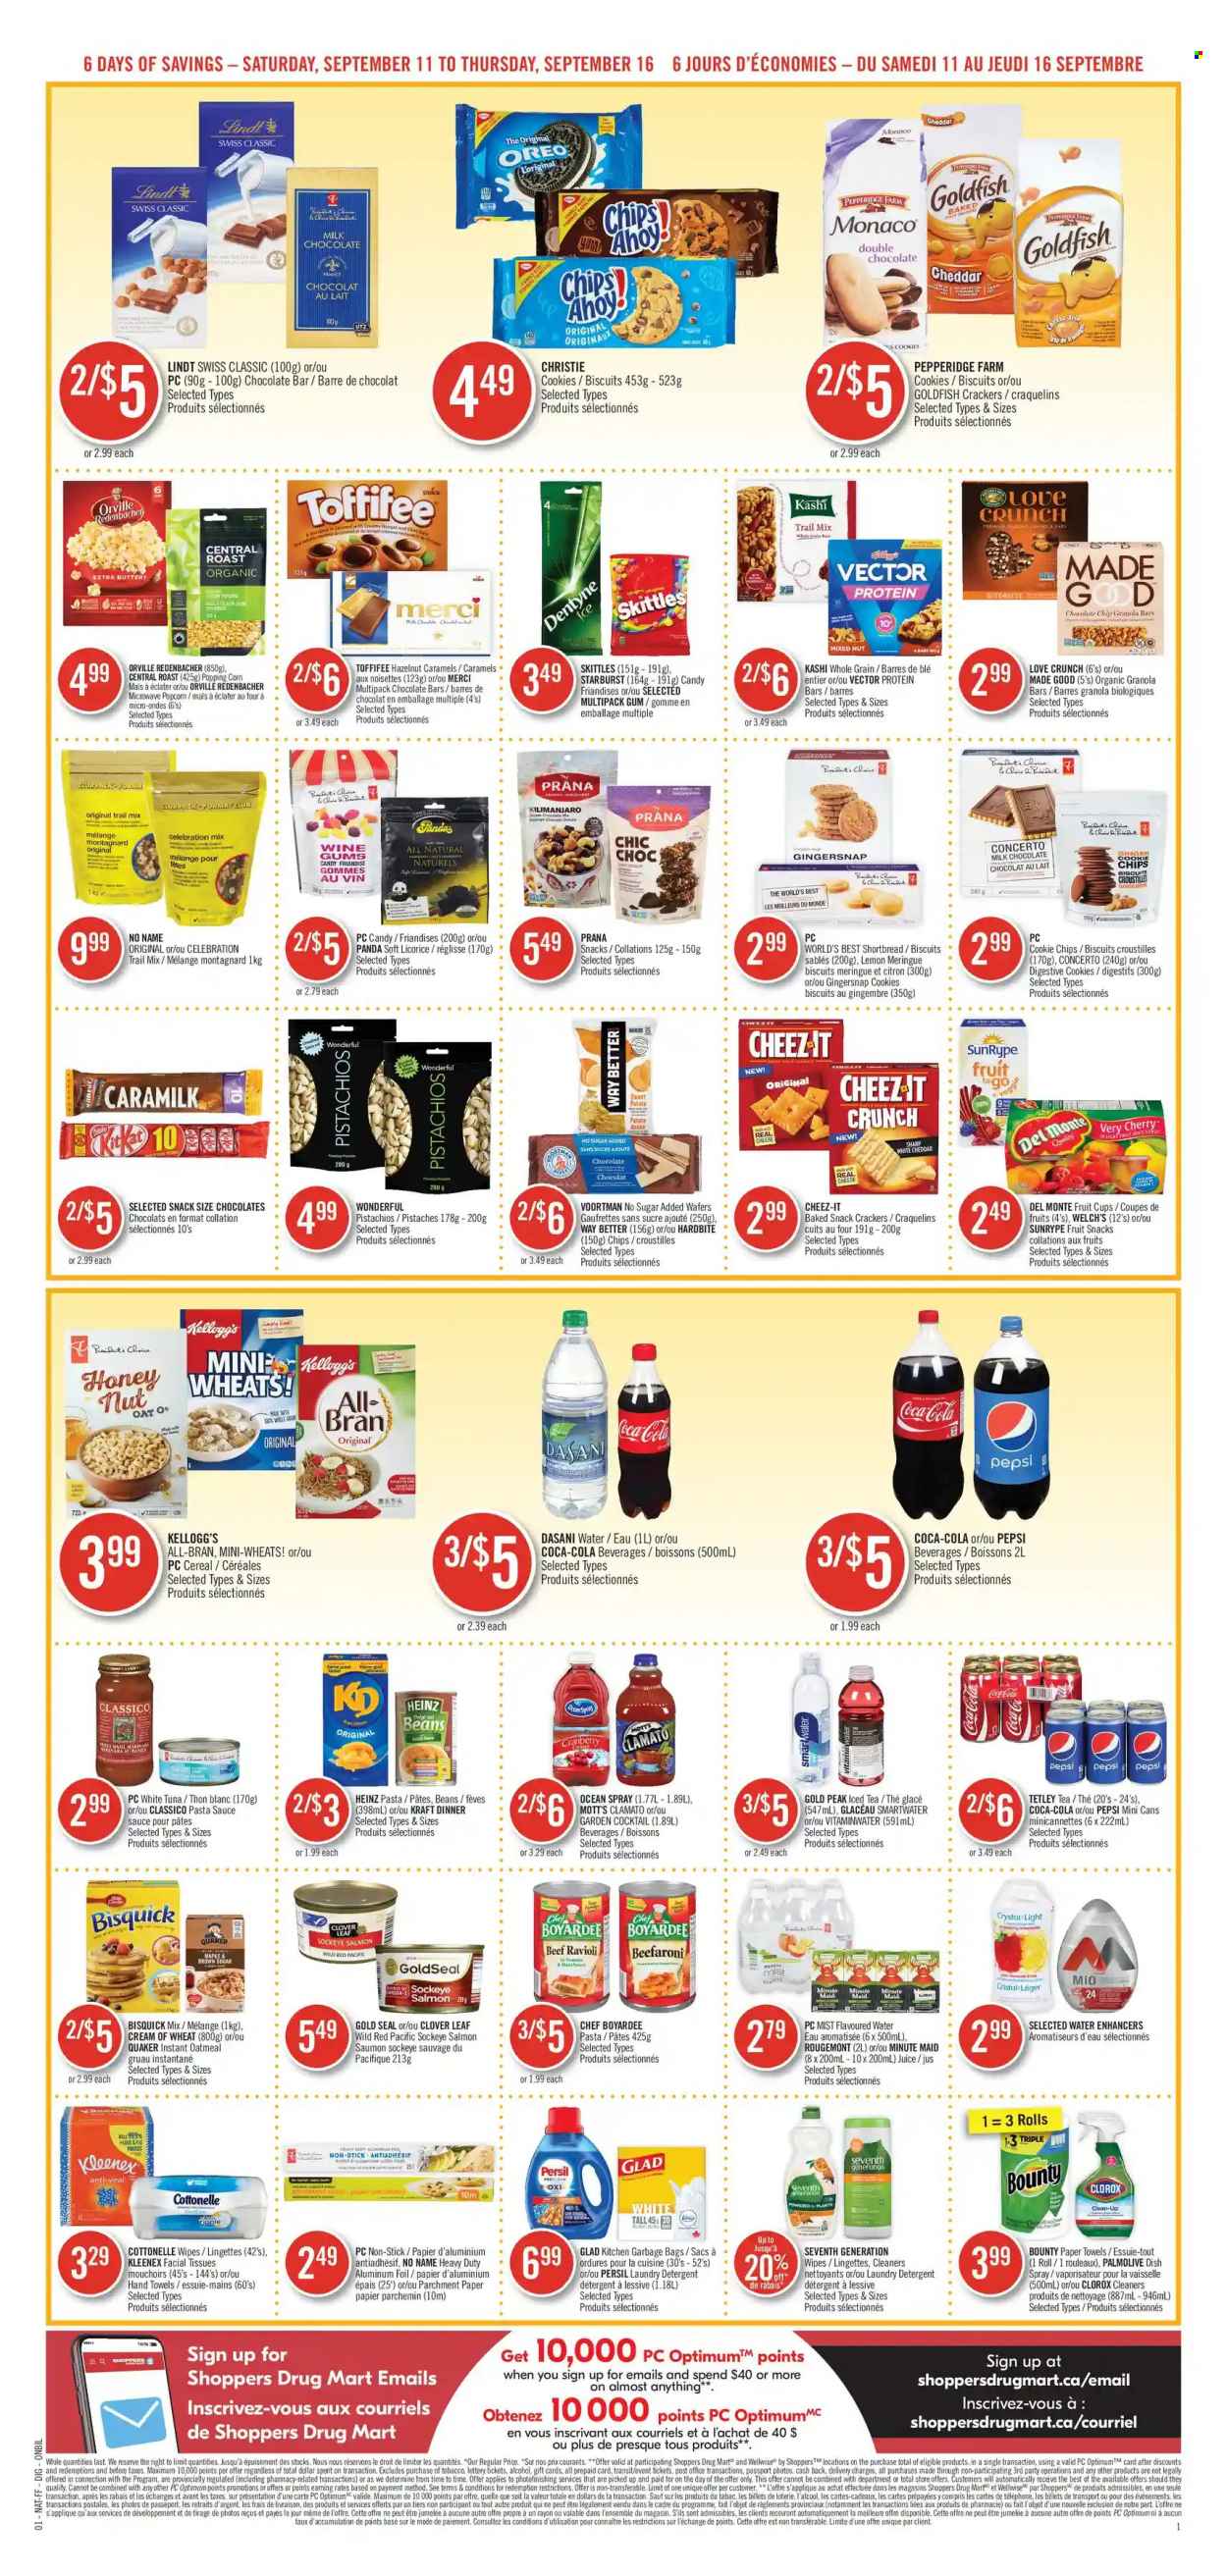 thumbnail - Shoppers Drug Mart Flyer - September 11, 2021 - September 16, 2021 - Sales products - cookies, milk chocolate, wafers, Bounty, Celebration, crackers, Kellogg's, biscuit, Merci, Digestive, Skittles, Welch's, fruit snack, Mott's, Starburst, chocolate bar, popcorn, Goldfish, Cheez-It, Bisquick, cane sugar, oats, beans, corn, salmon, Heinz, pasta sauce, sauce, Chef Boyardee, cereals, Cream of Wheat, protein bar, granola bar, Quaker, All-Bran, ravioli, Classico, Kraft®, pistachios, trail mix, Coca-Cola, Pepsi, juice, ice tea, Clamato, Clover, fruit punch, Smartwater, wipes, Cottonelle, Kleenex, tissues, kitchen towels, paper towels, Clorox, Persil, laundry detergent, Palmolive, facial tissues, alcohol, Oreo, detergent, chips, Lindt. Page 8.